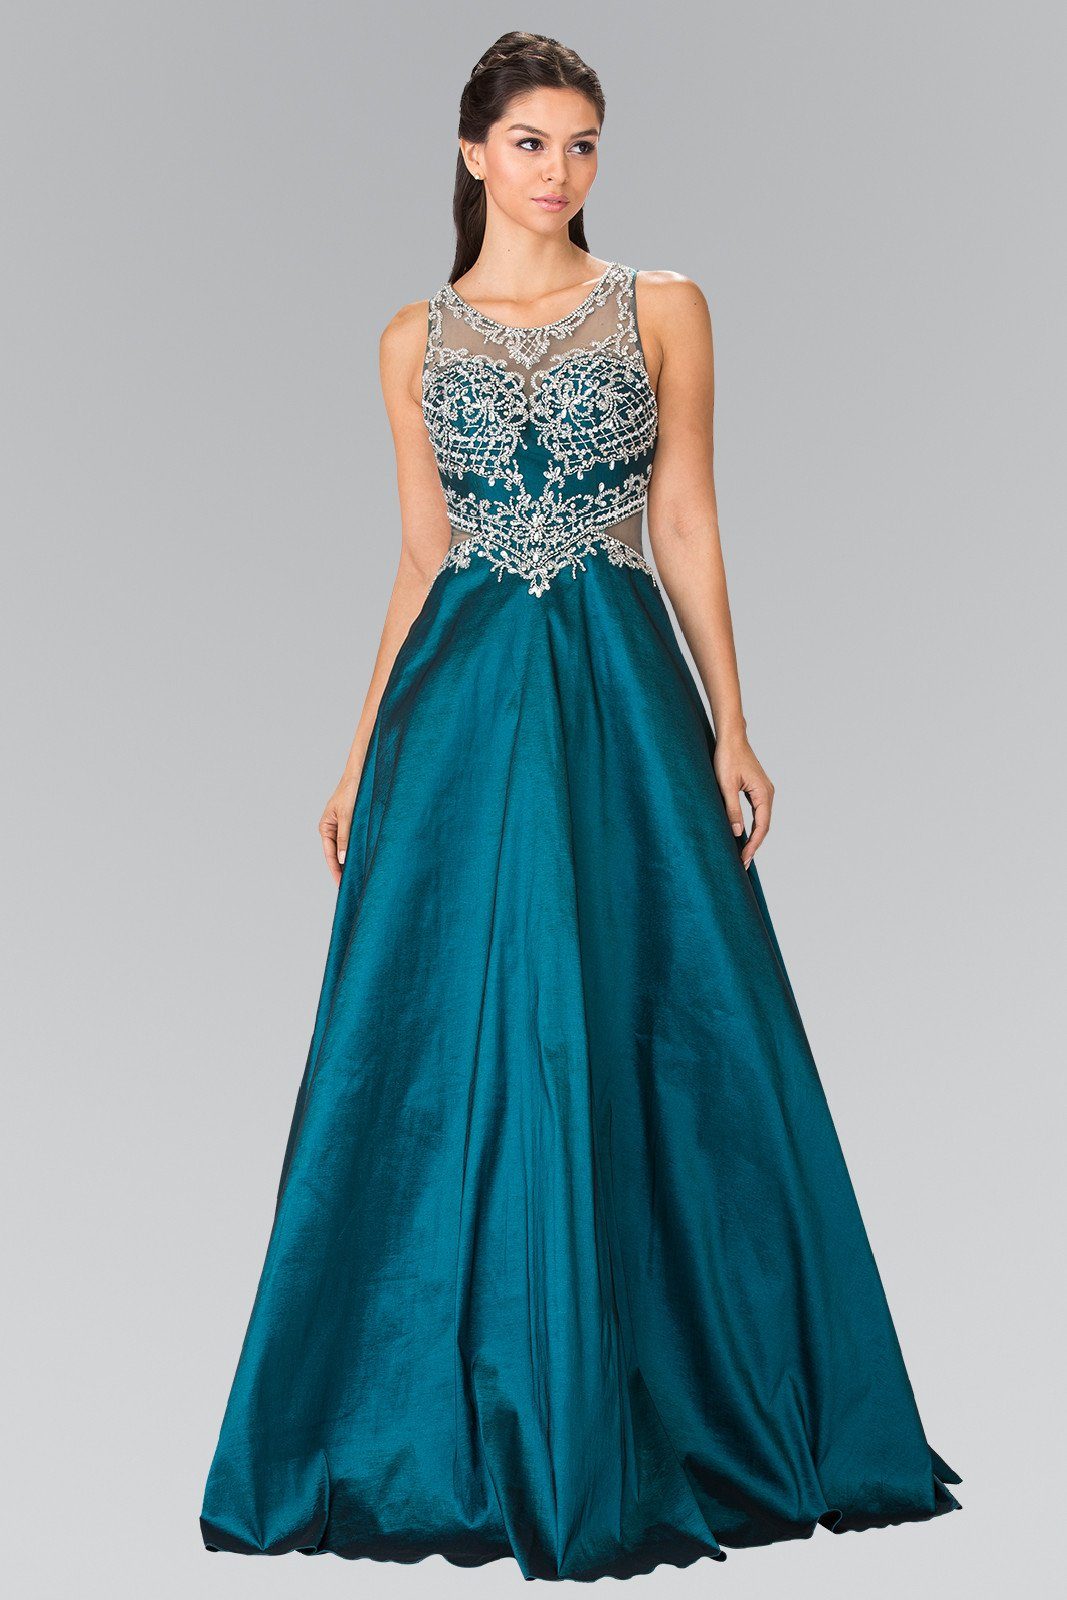 Long Beaded Gown with Sheer Side Cutouts by Elizabeth K GL2253 – ABC ...